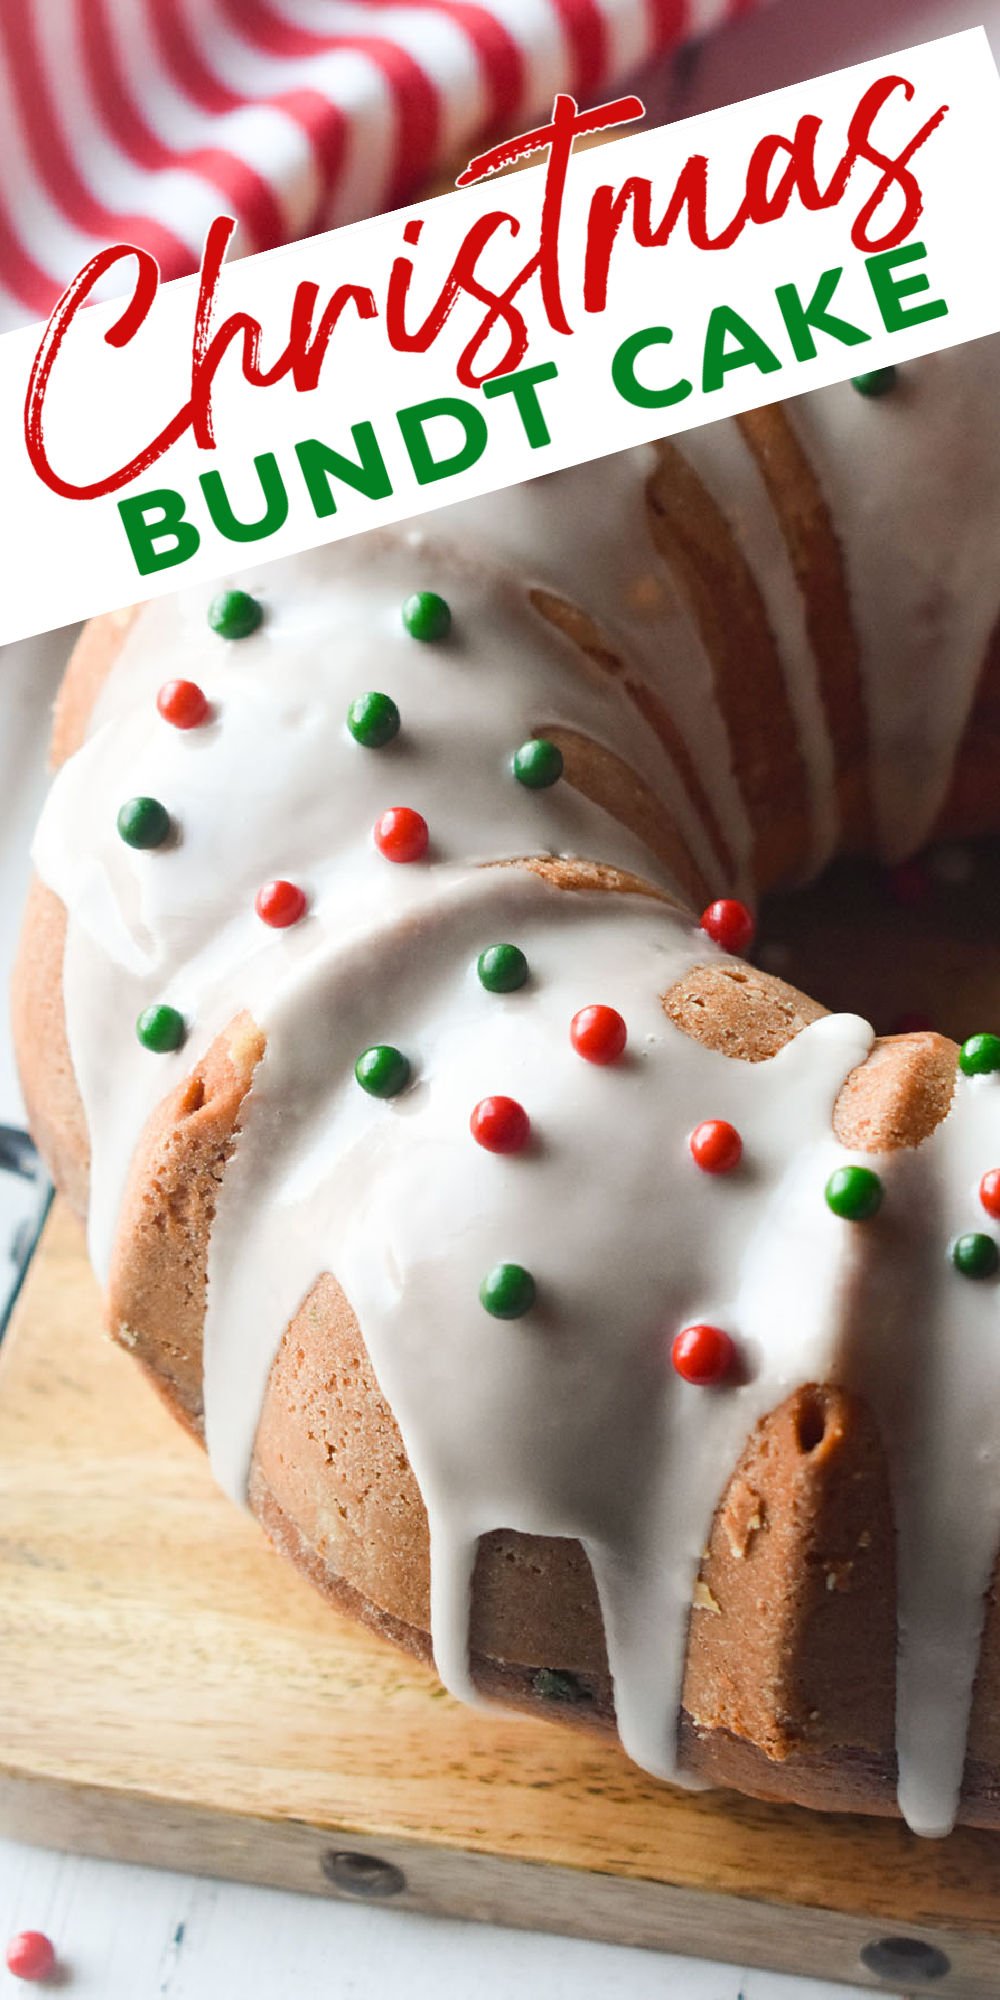 This Christmas Bundt Cake is easy, made from scratch, and festive. A simple icing and sprinkles dress it up for the holiday. | www.persnicketyplates.com